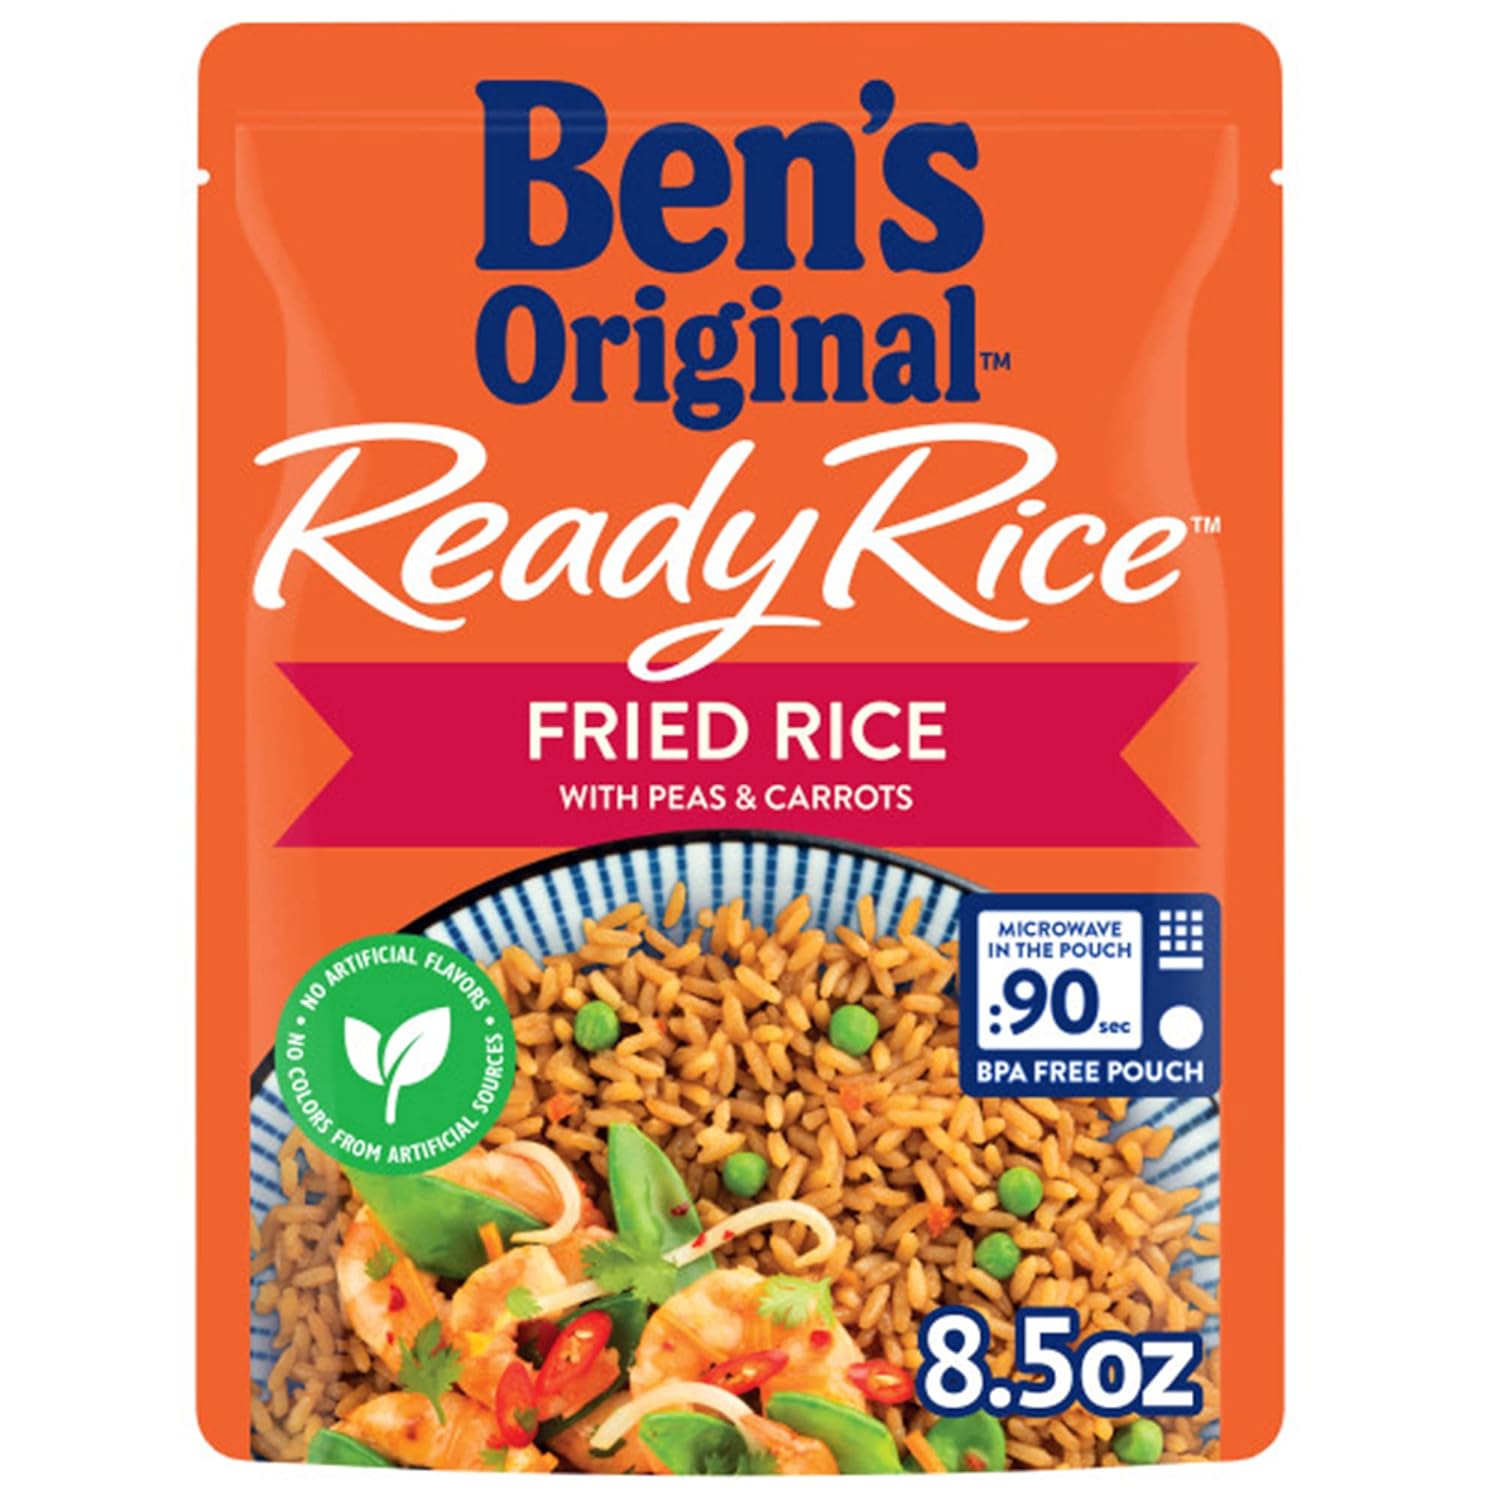 BEN'S ORIGINAL Ready Rice Fried Flavored Rice, Easy Dinner Side, 8.5 OZ Pouch (Pack of 12)